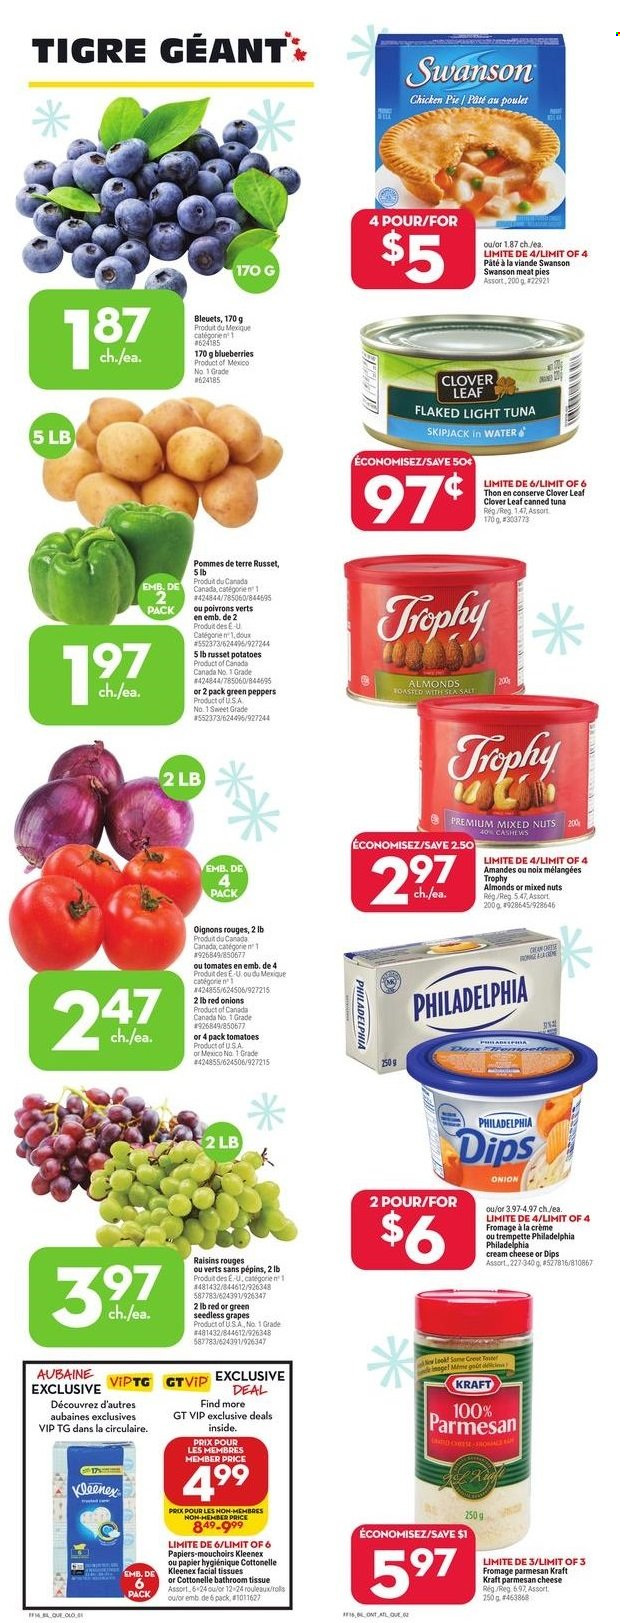 thumbnail - Giant Tiger Flyer - November 17, 2021 - November 23, 2021 - Sales products - pie, red onions, russet potatoes, tomatoes, potatoes, onion, peppers, blueberries, grapes, seedless grapes, tuna, Kraft®, parmesan, Clover, canned tuna, light tuna, almonds, cashews, dried fruit, mixed nuts, bath tissue, Cottonelle, Kleenex, facial tissues, raisins, Philadelphia. Page 1.